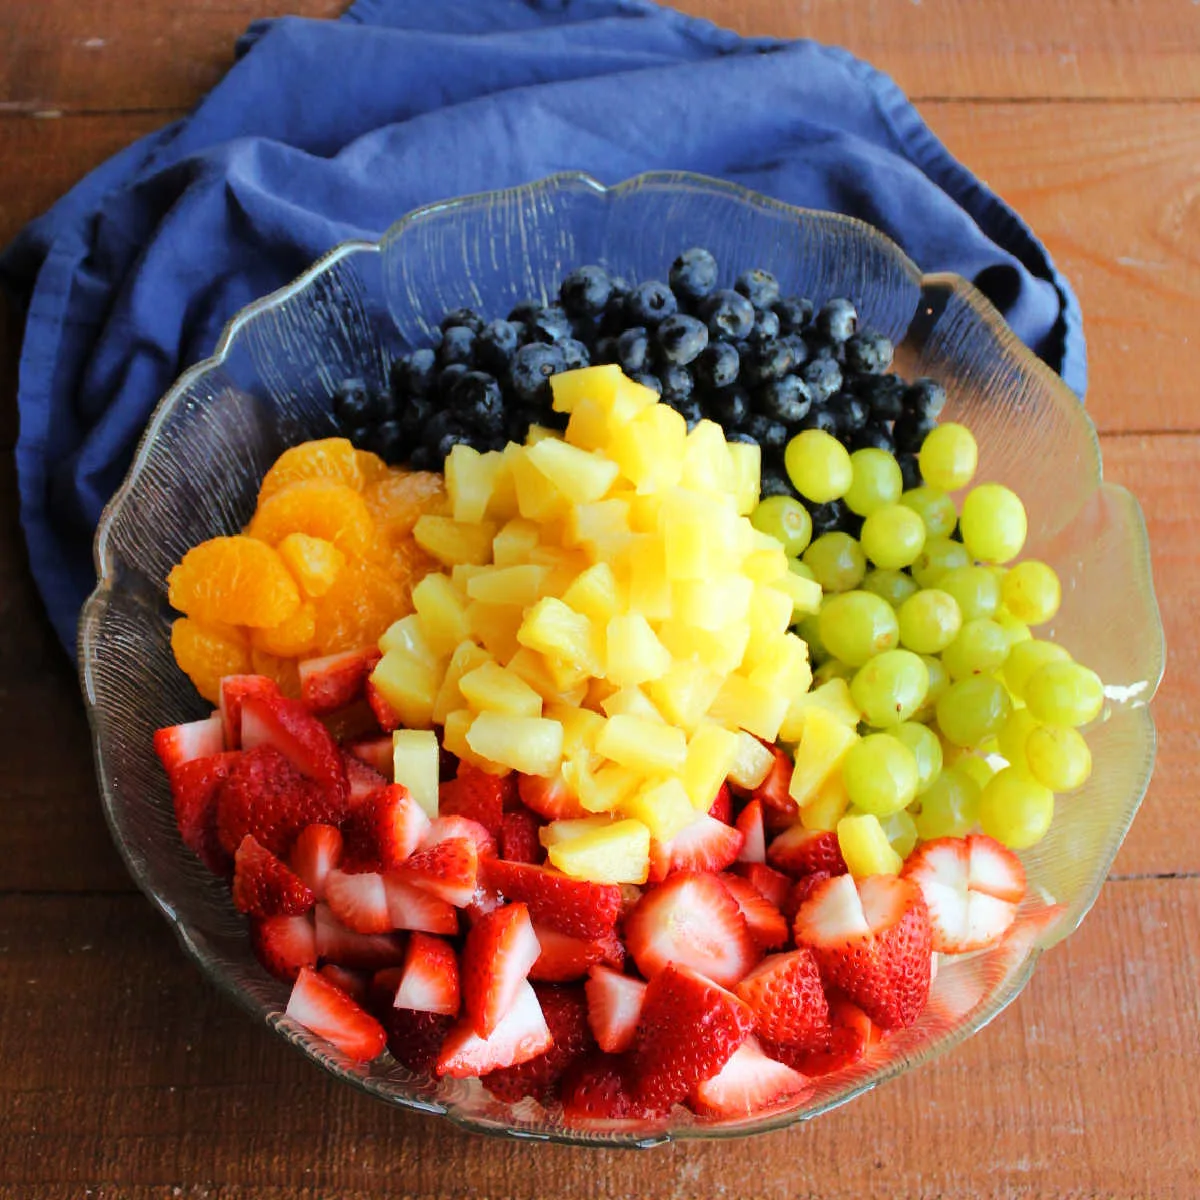 Strawberries, blueberries, grapes, oranges and pineapple added to bowl with apples, banana, and lemon juice.